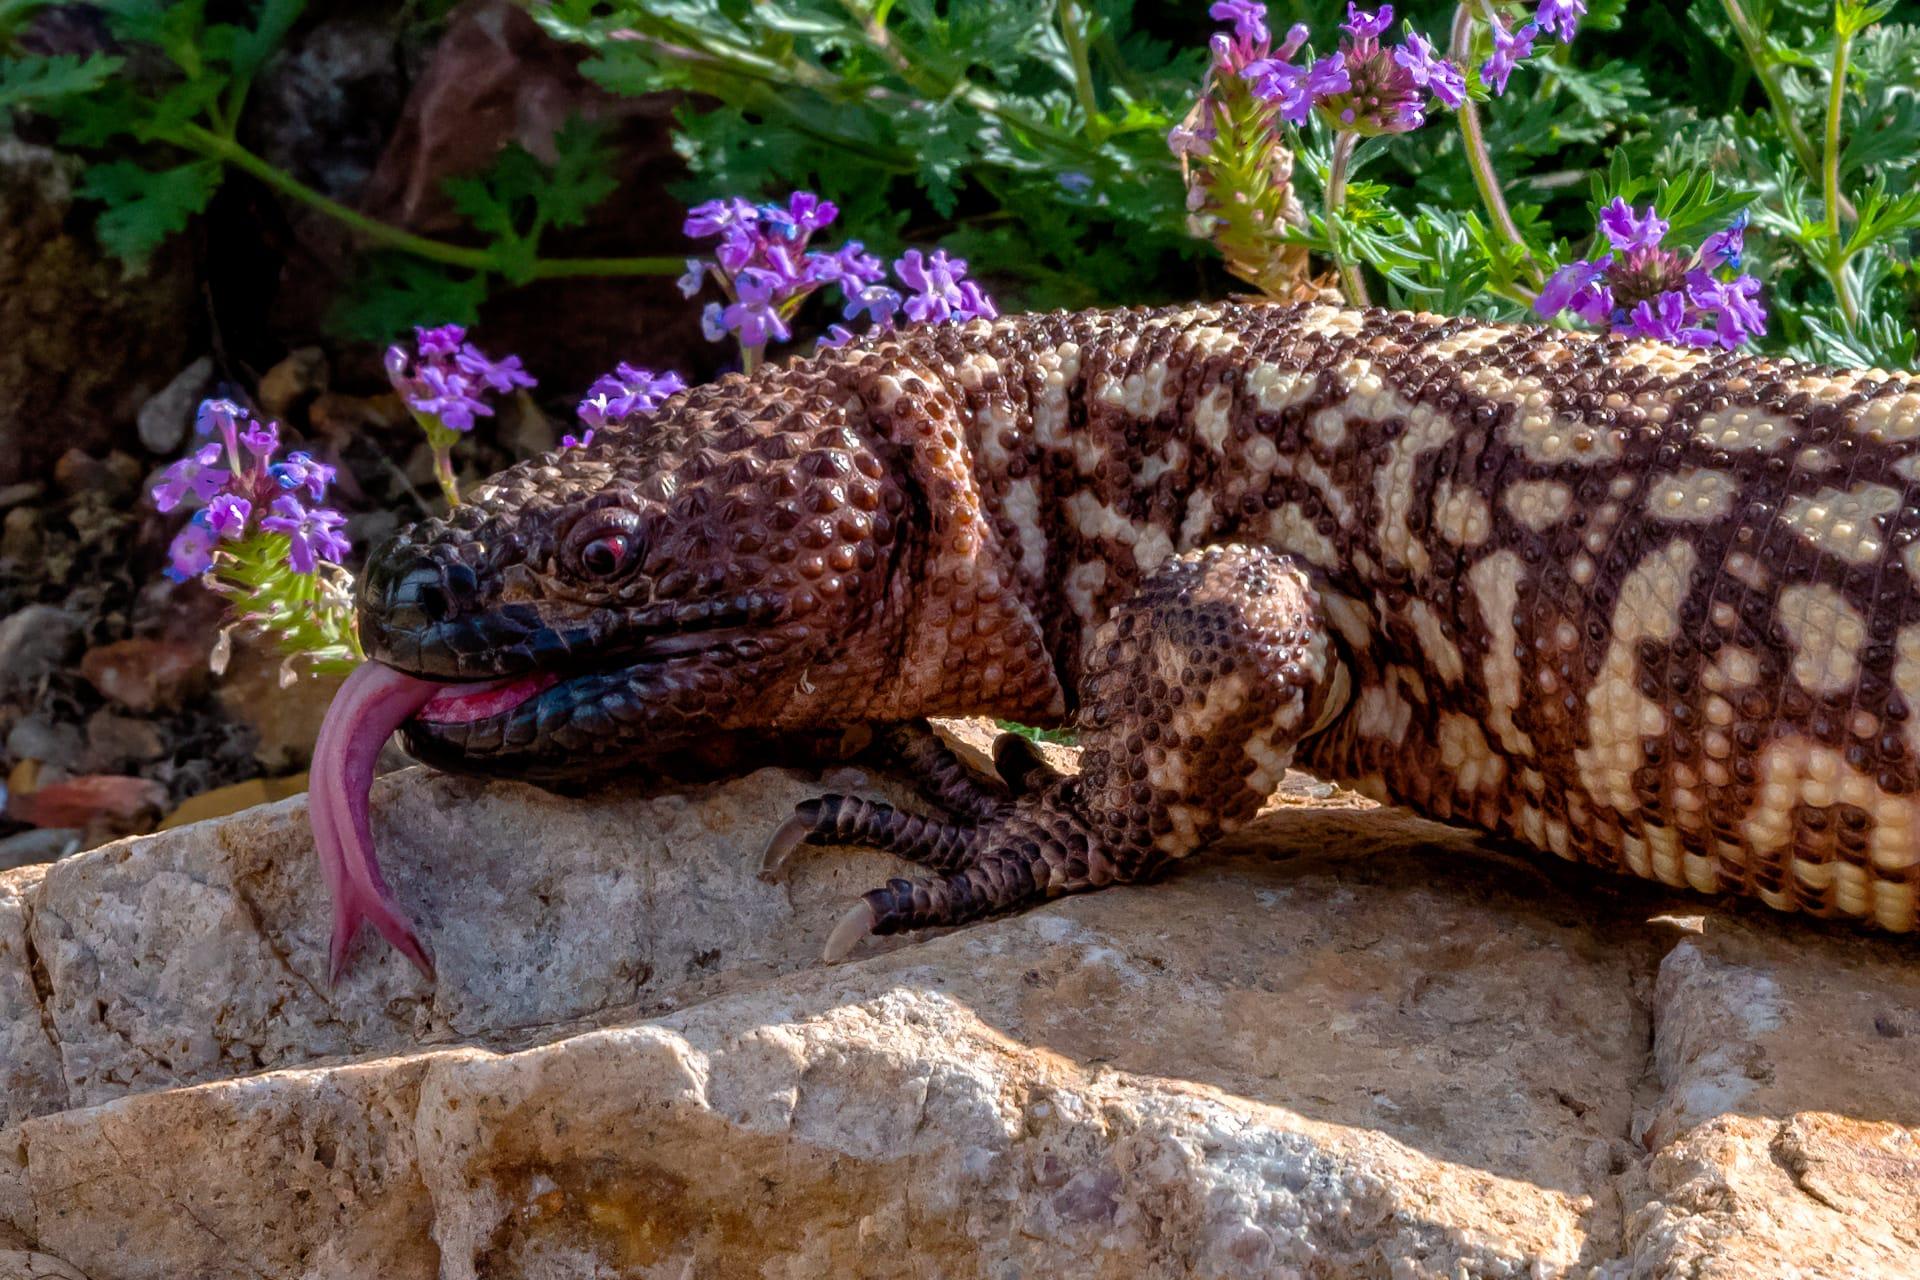 Mexican beaded lizard pictures